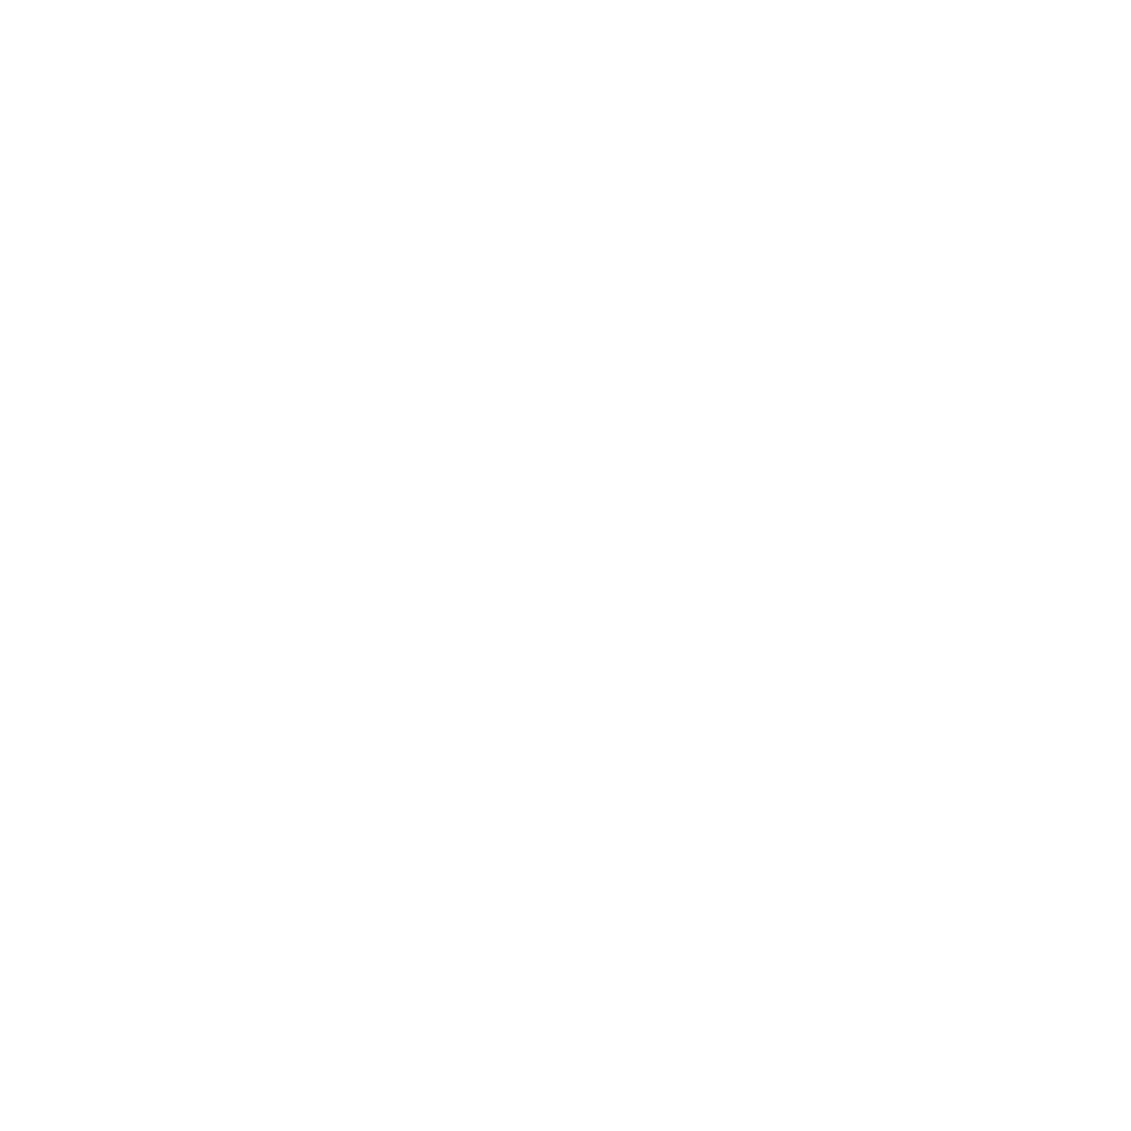 North American Genealogical Services